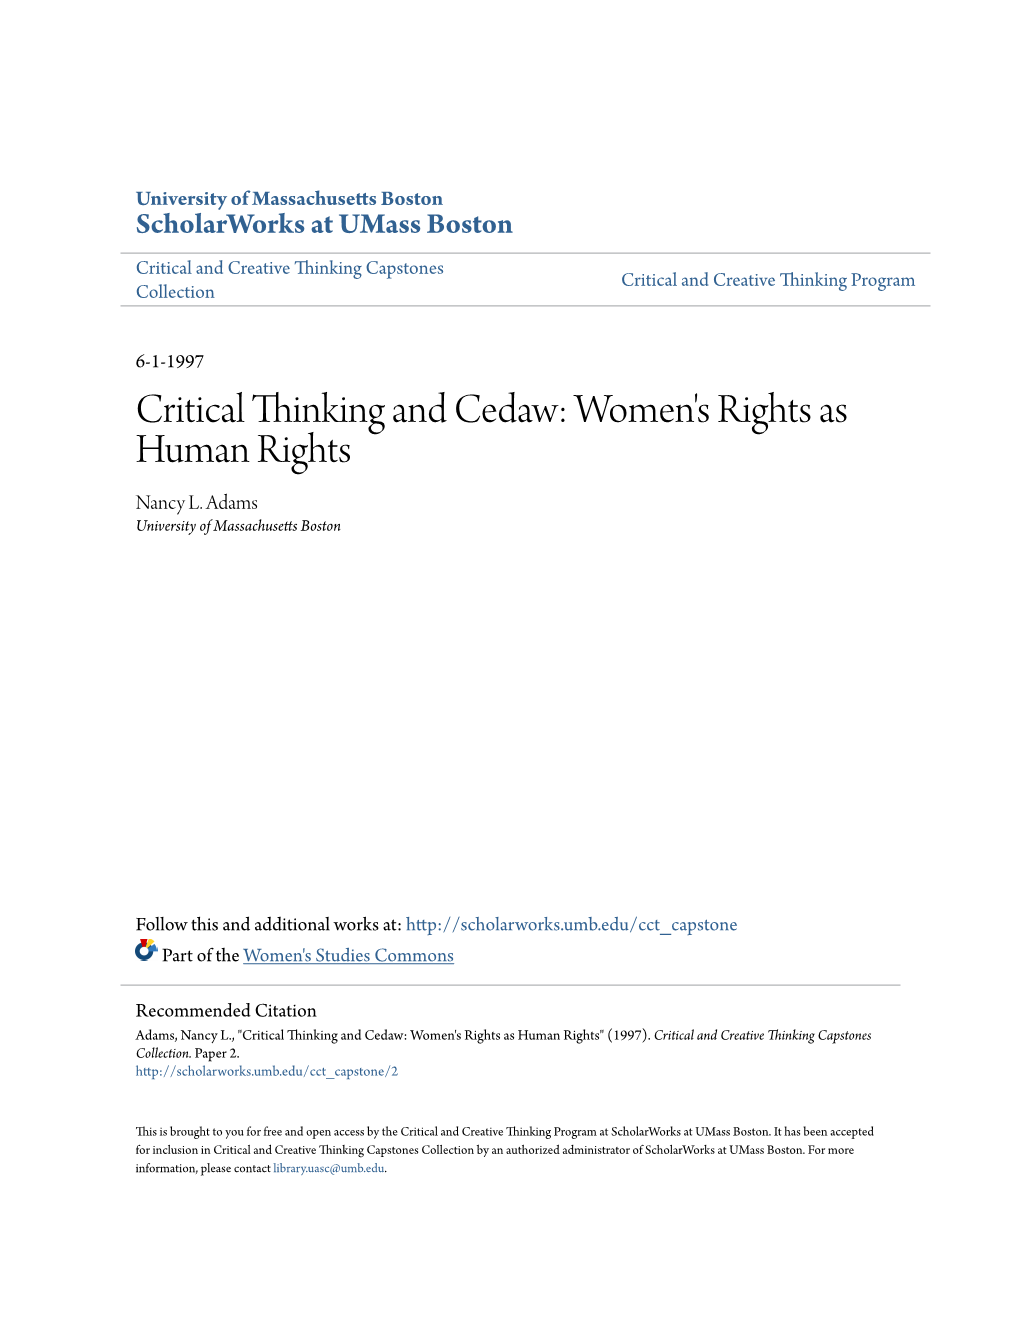 Critical Thinking and Cedaw: Women's Rights As Human Rights Nancy L